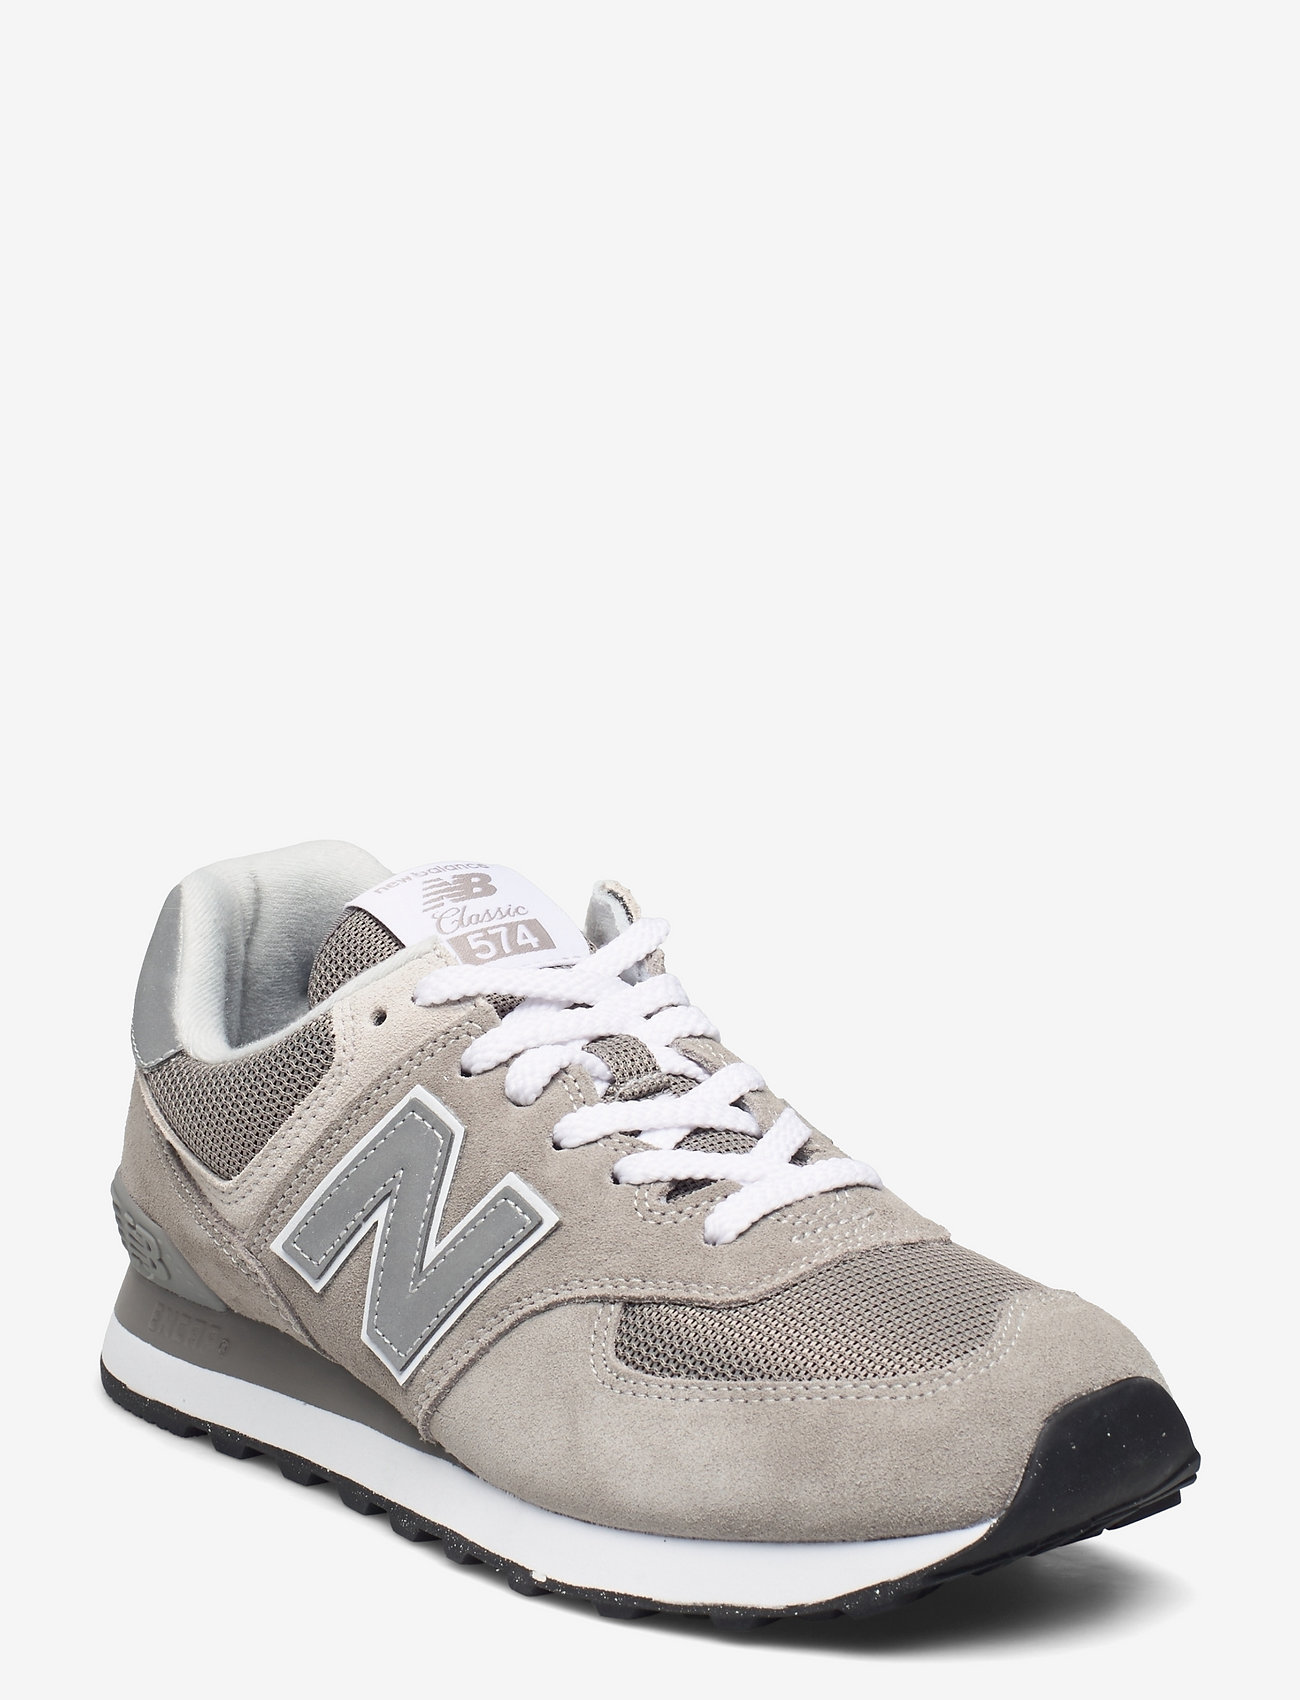 New Balance Wl574evg - Low top sneakers | Boozt.com